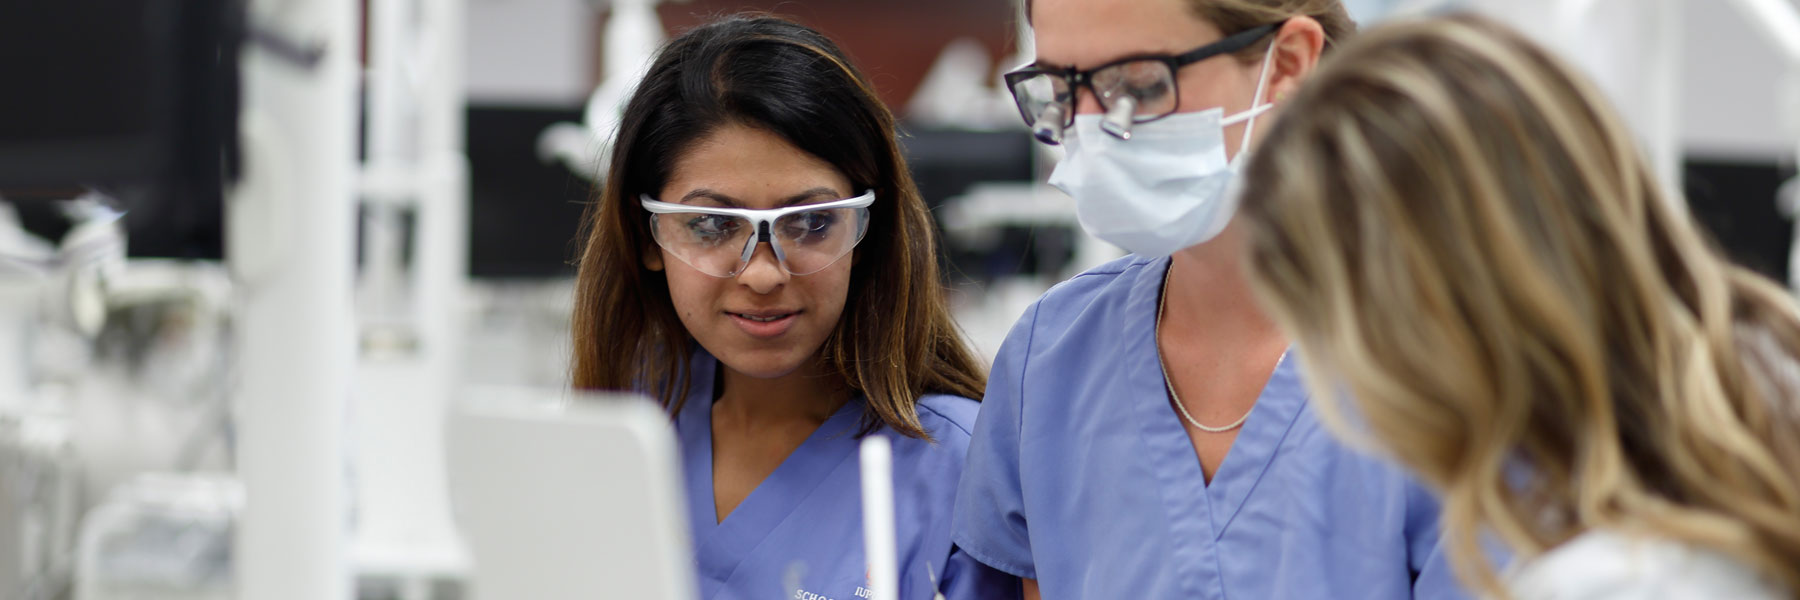 Three students wear scrubs and protective glasses and work together in a lab.